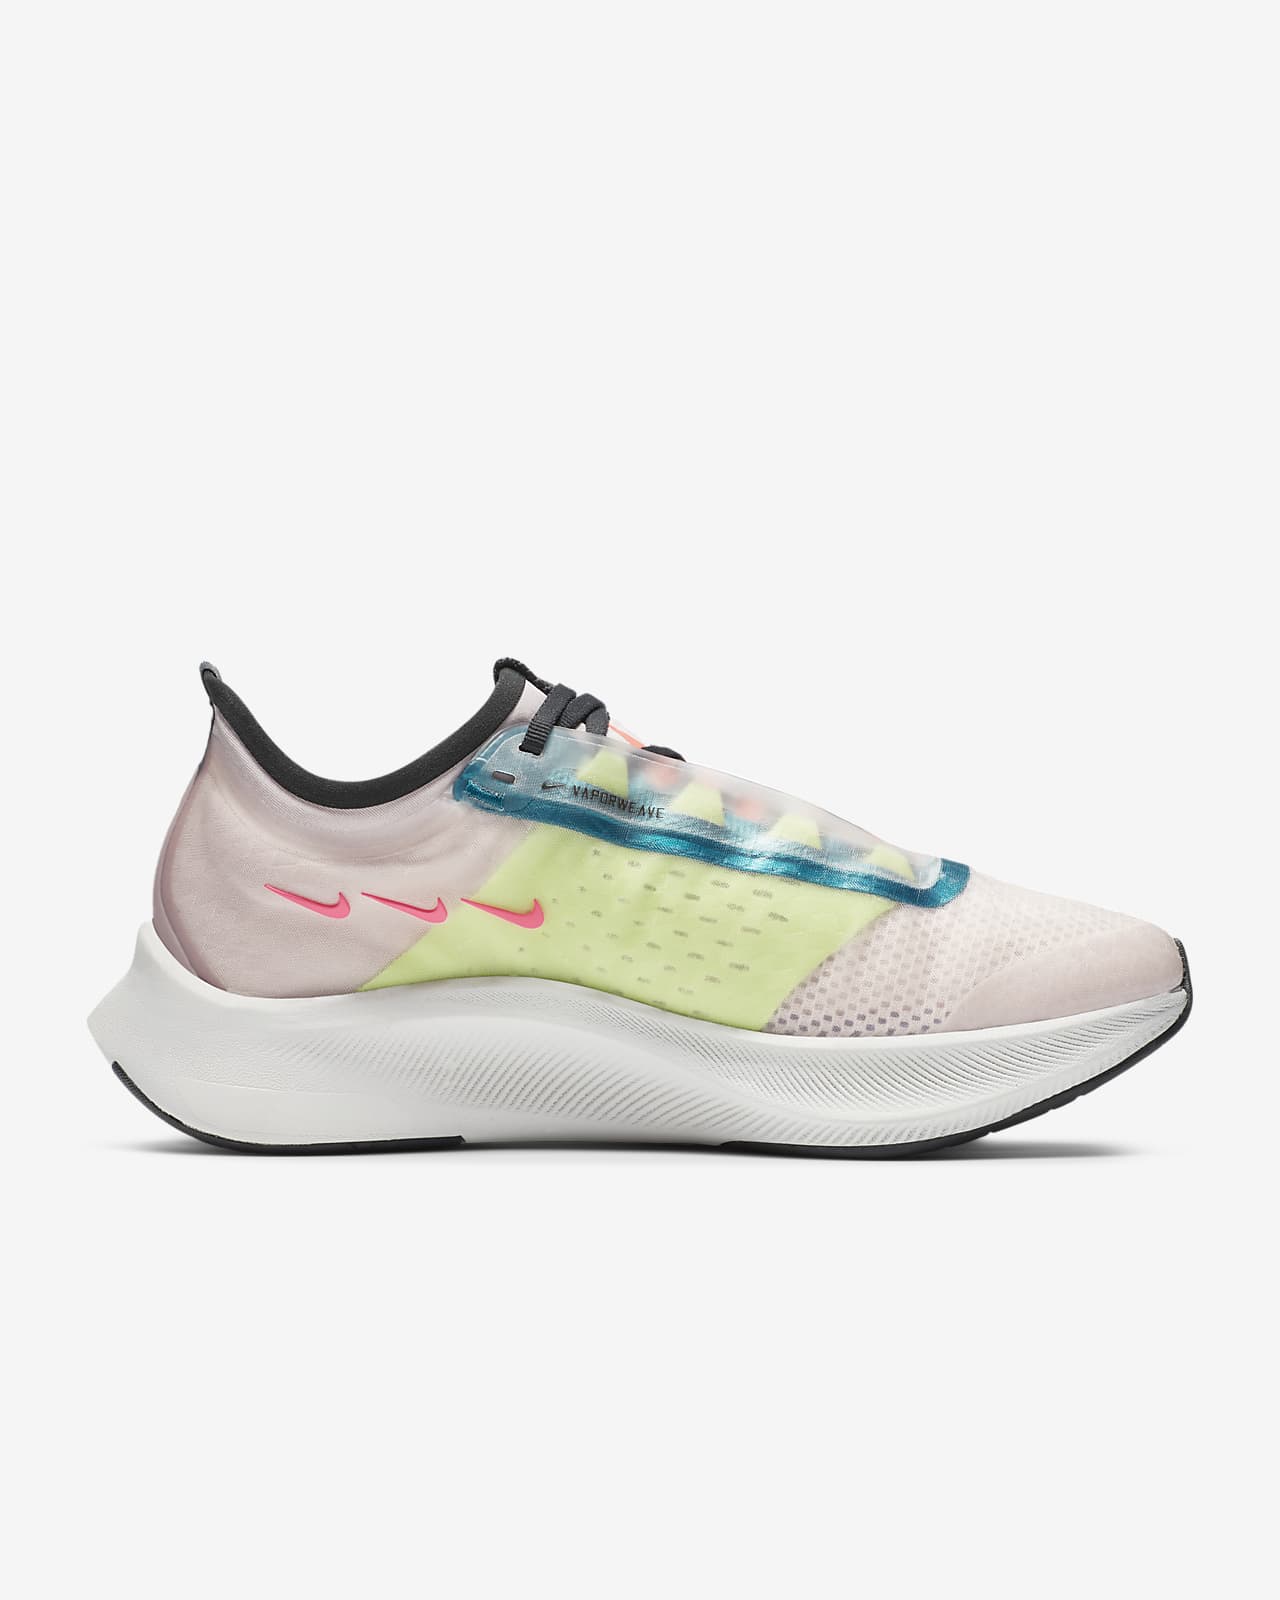 nike zoom fly 3 size 10